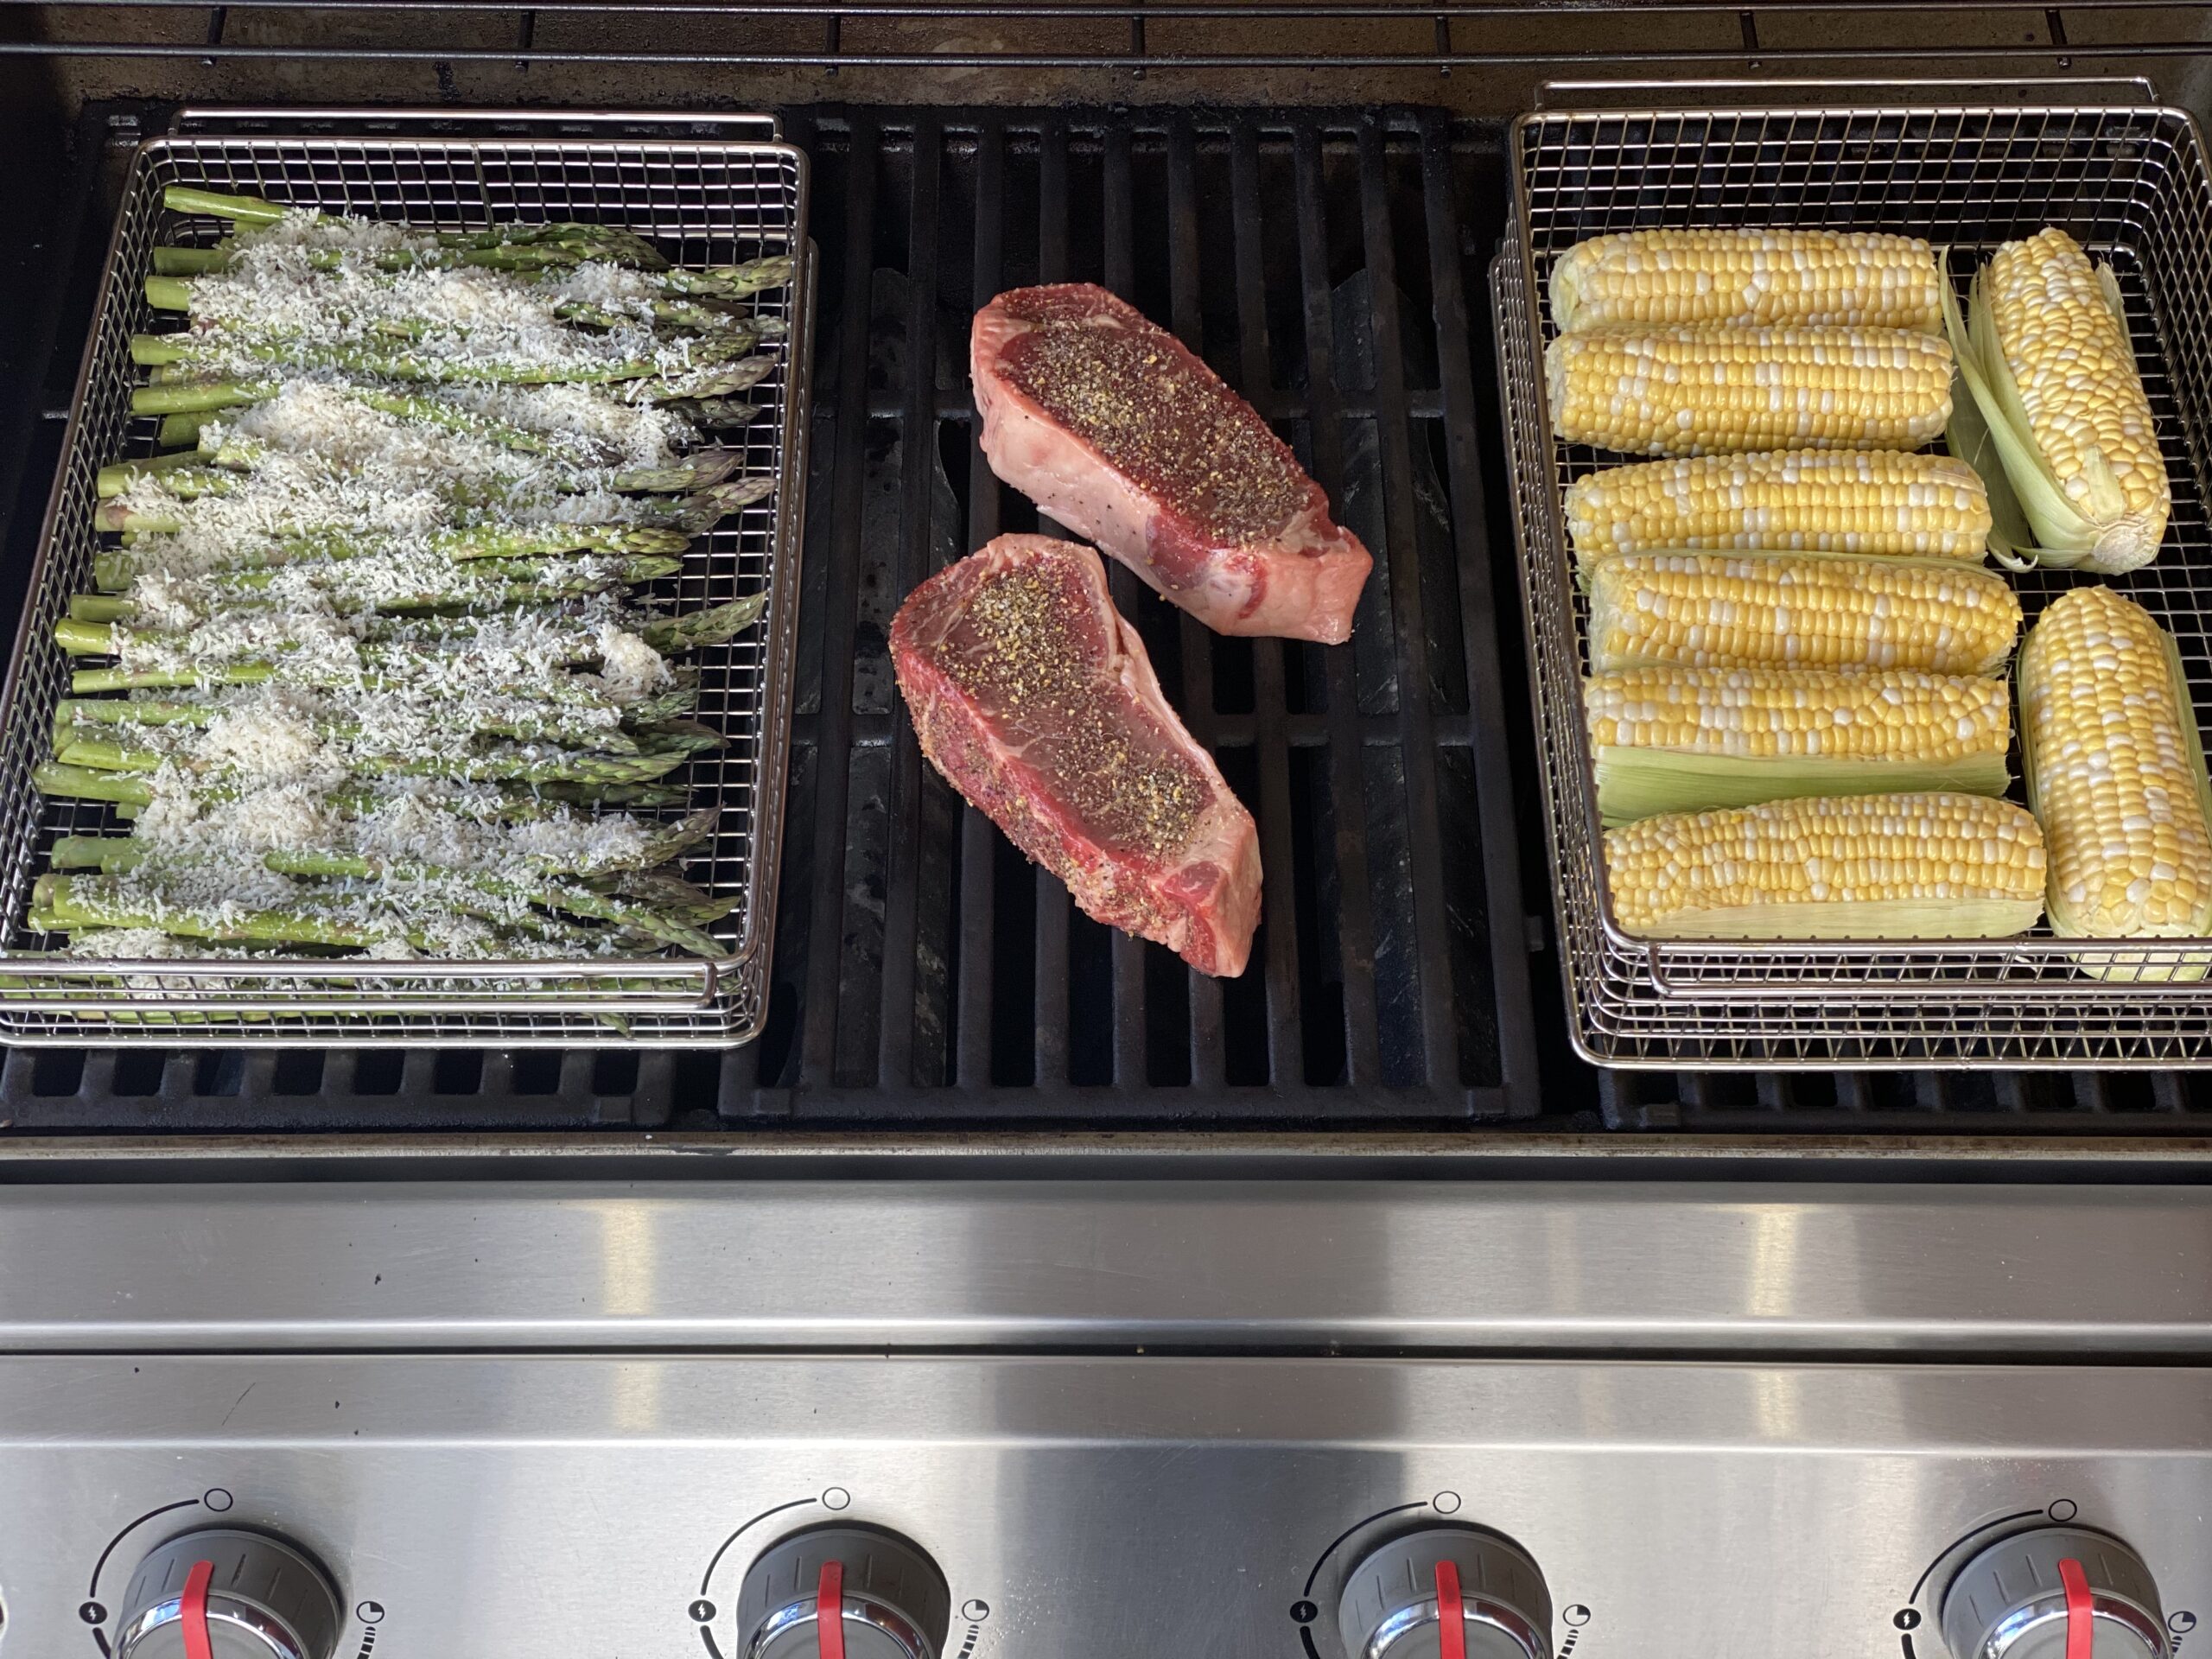 Asparagus, steak and corn on the grill